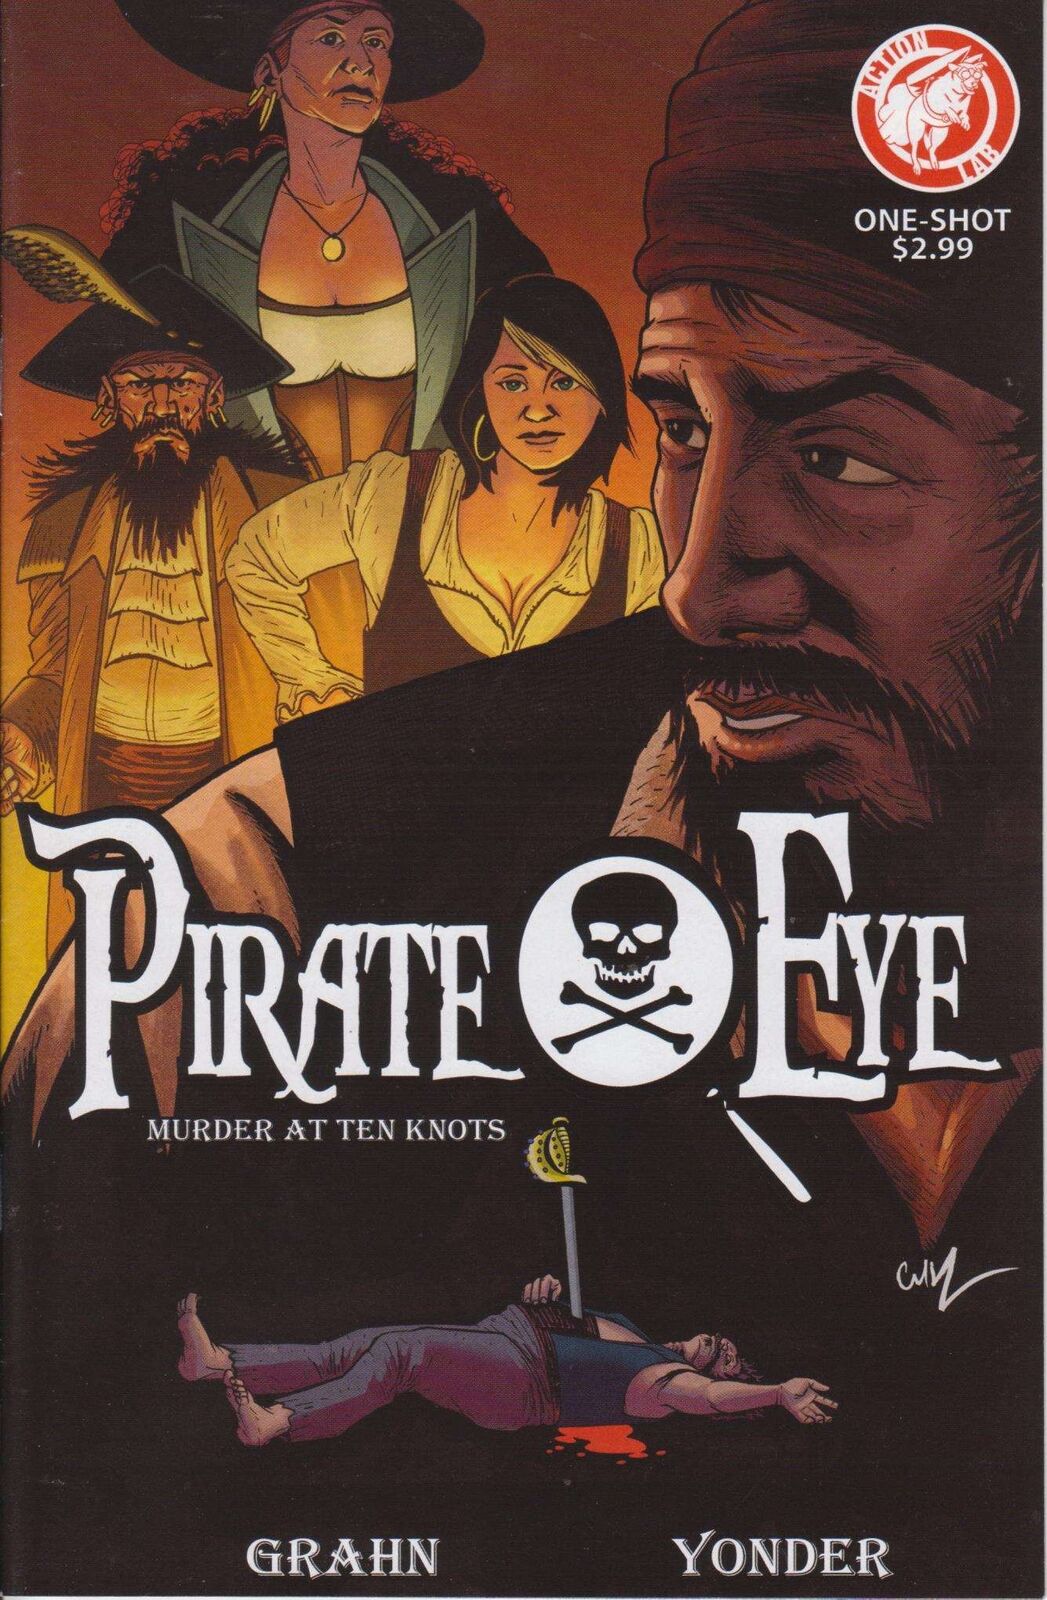 Pirate Eye #3 VF/NM; Action Lab | Murder At Ten Knots - we combine shipping